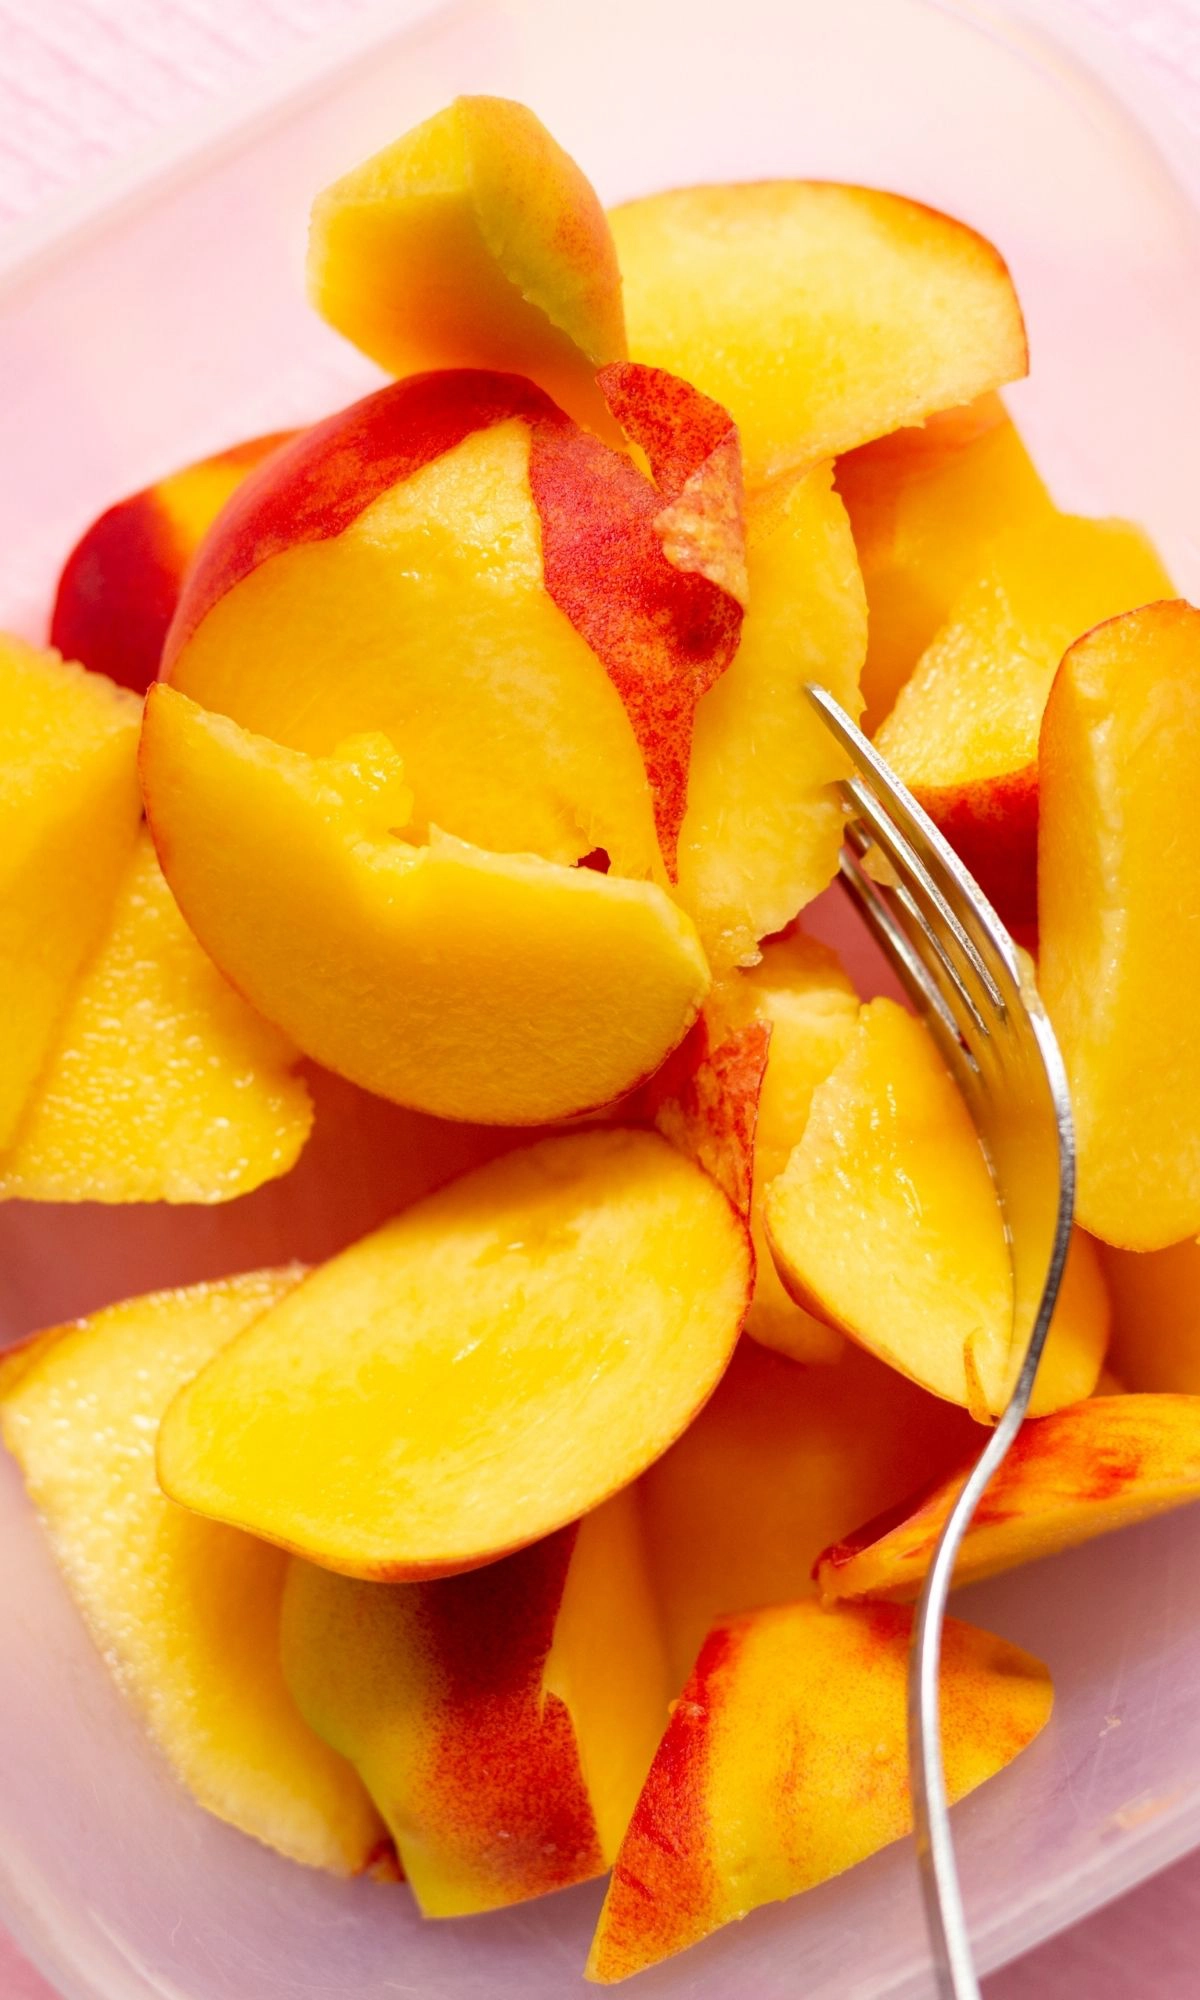 Sliced peaches with fork. 